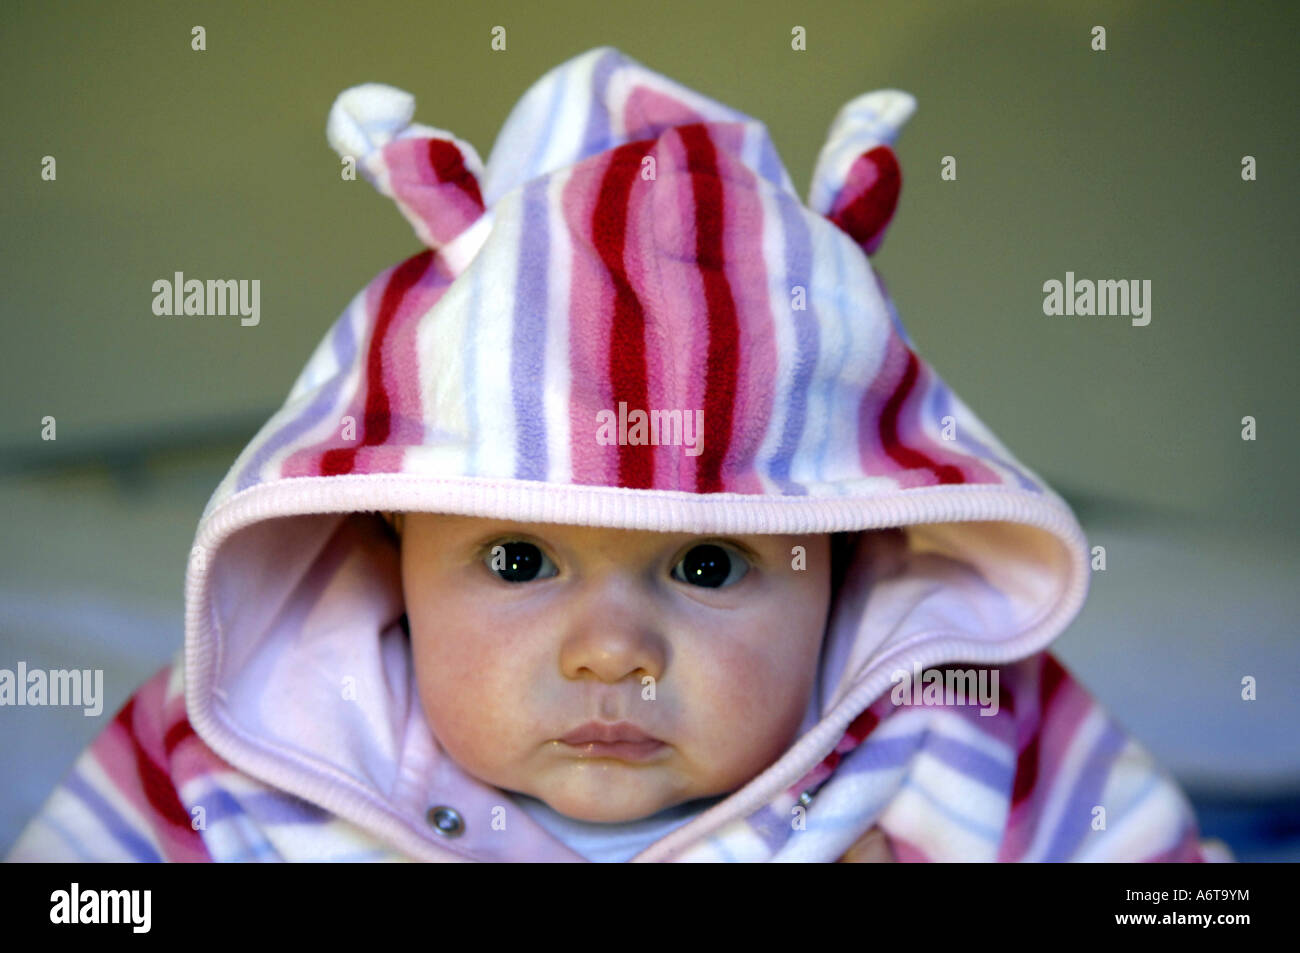 baby girl three months old caucasian colour color face head hoodie hoody clothing stripes stripey stripy horizontal portrait Stock Photo